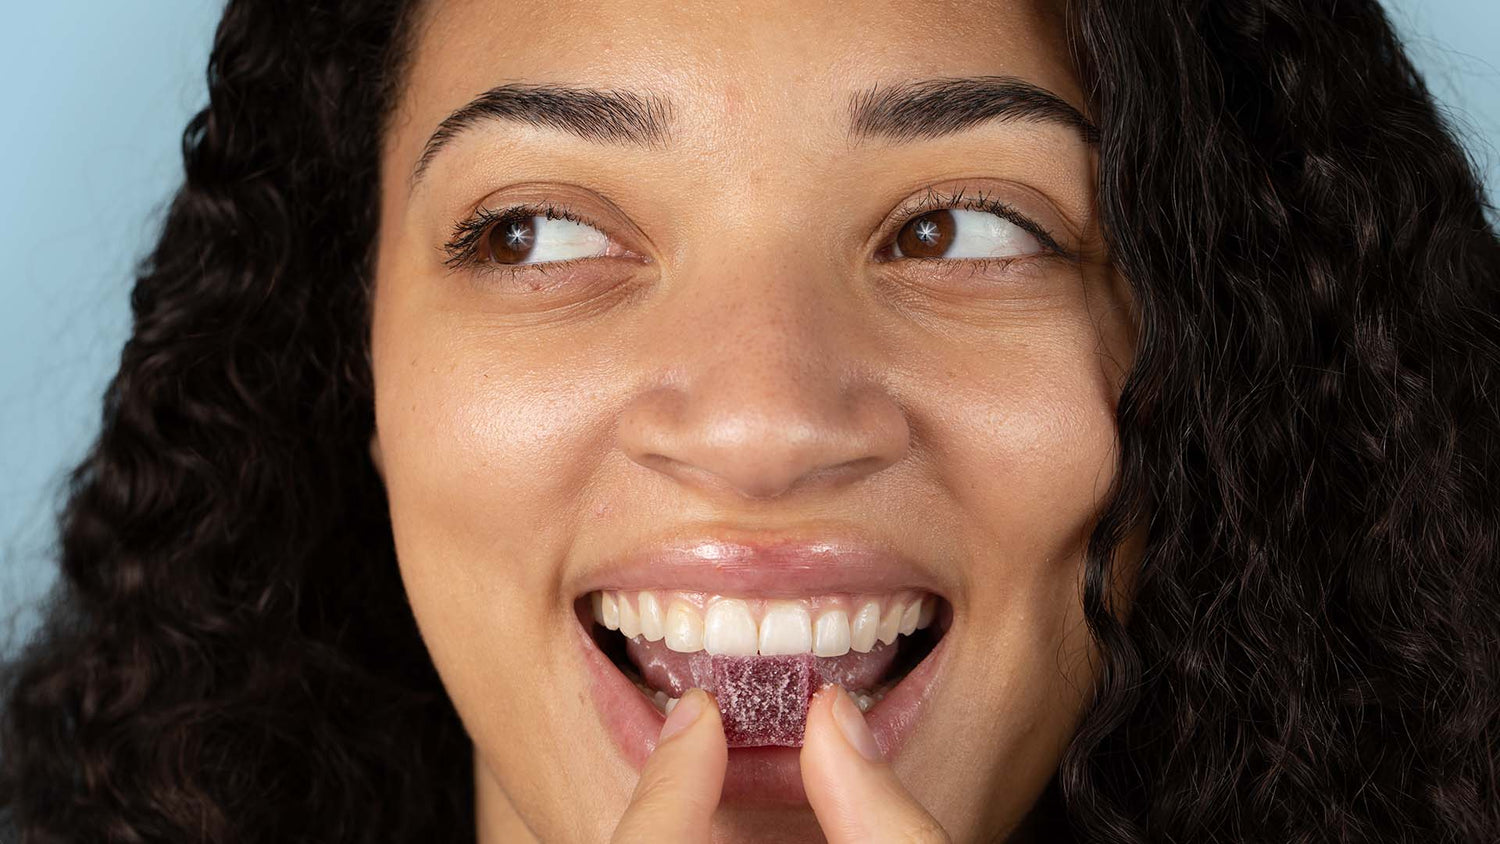 A woman smiling while eating a dark red gummy.